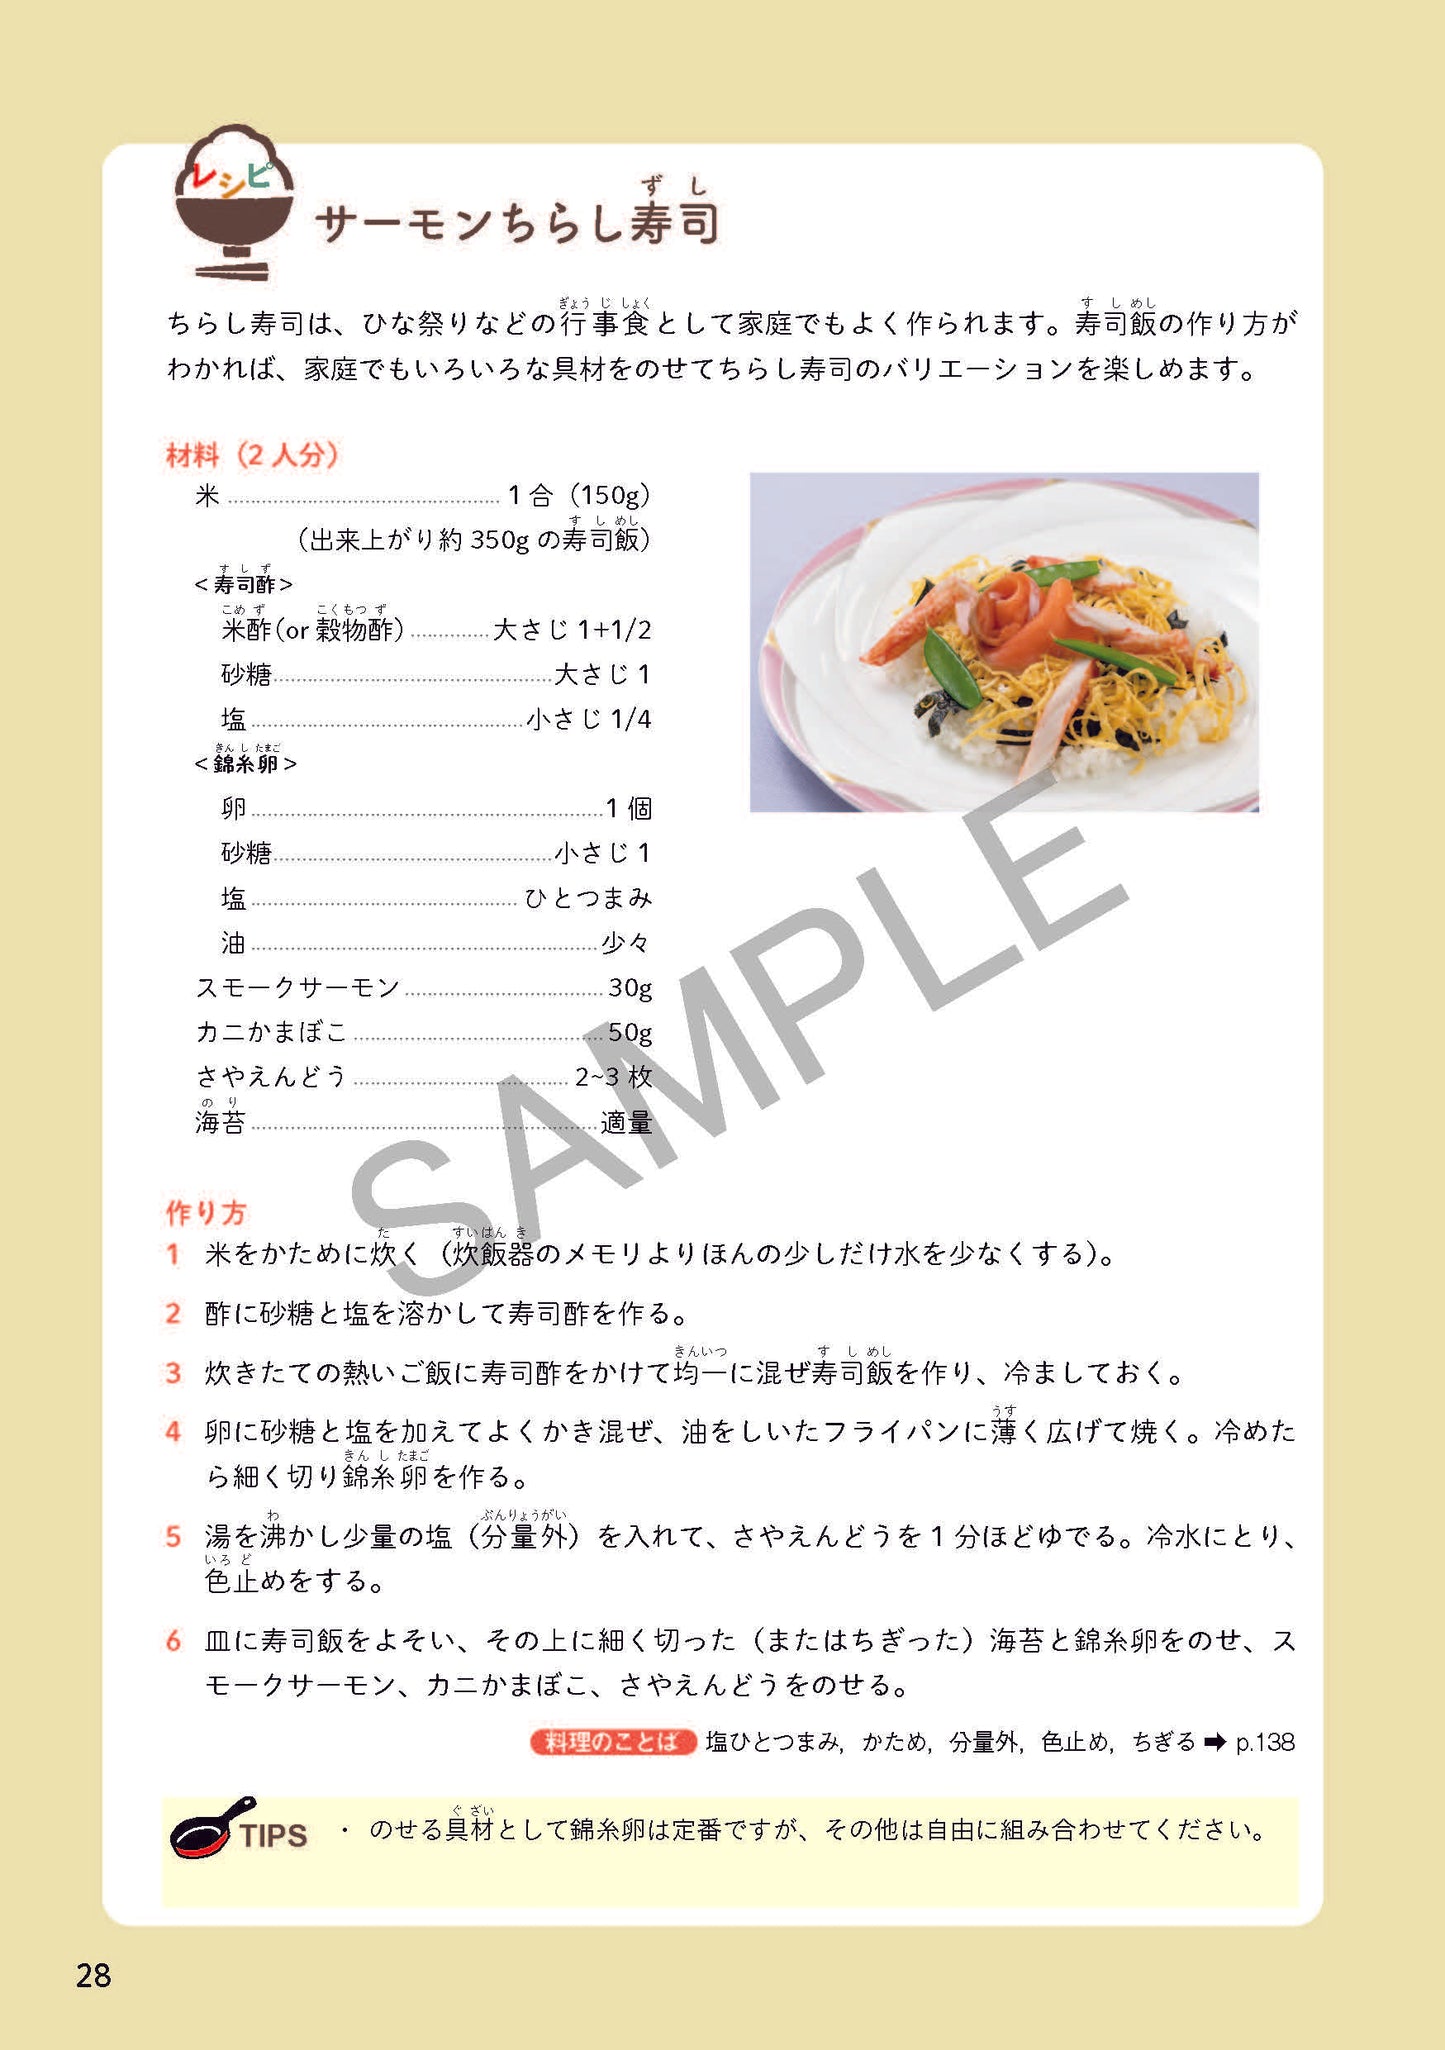 Meshiagare - A Culinary Journey Through Advanced Japanese - Sample Page 12